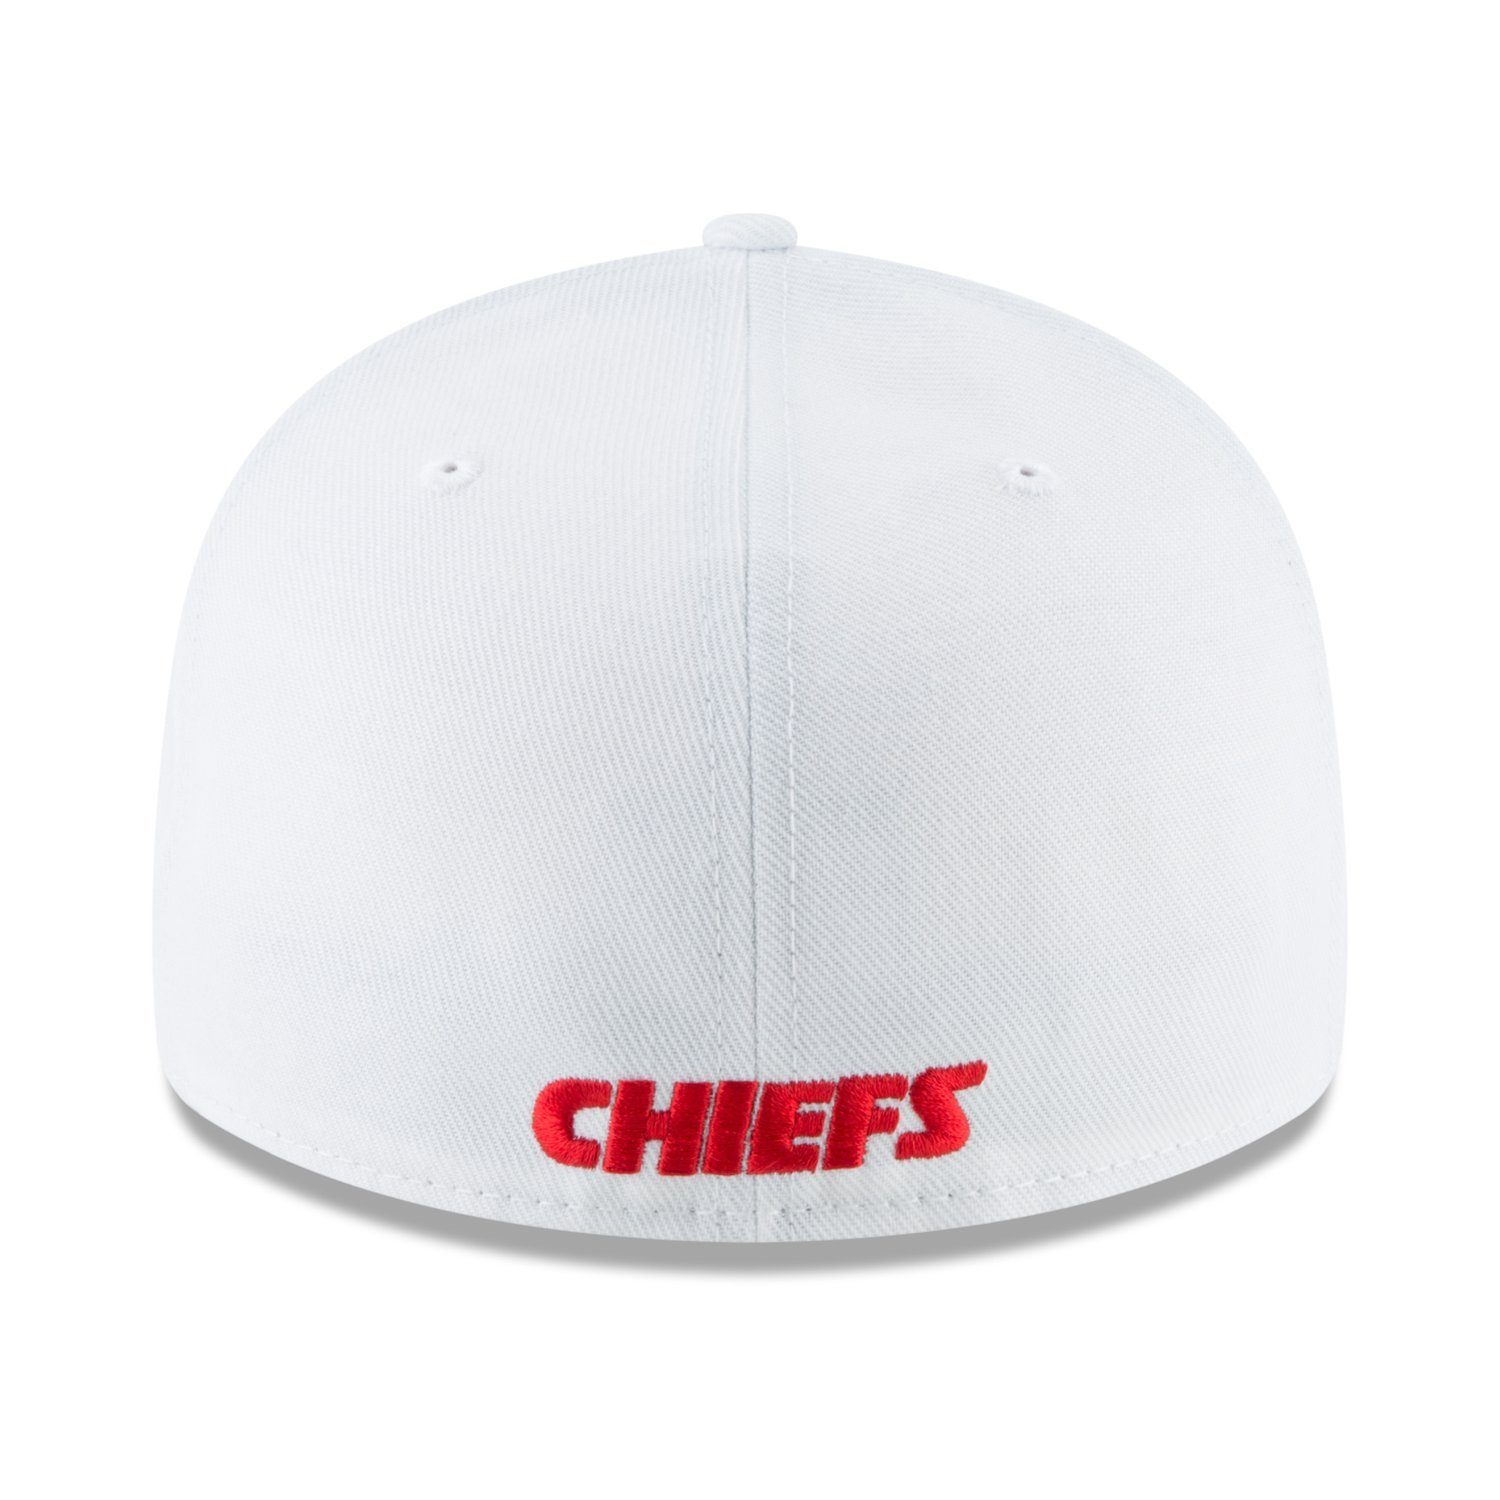 Profile City Cap Low Kansas Era Chiefs New Fitted 59Fifty